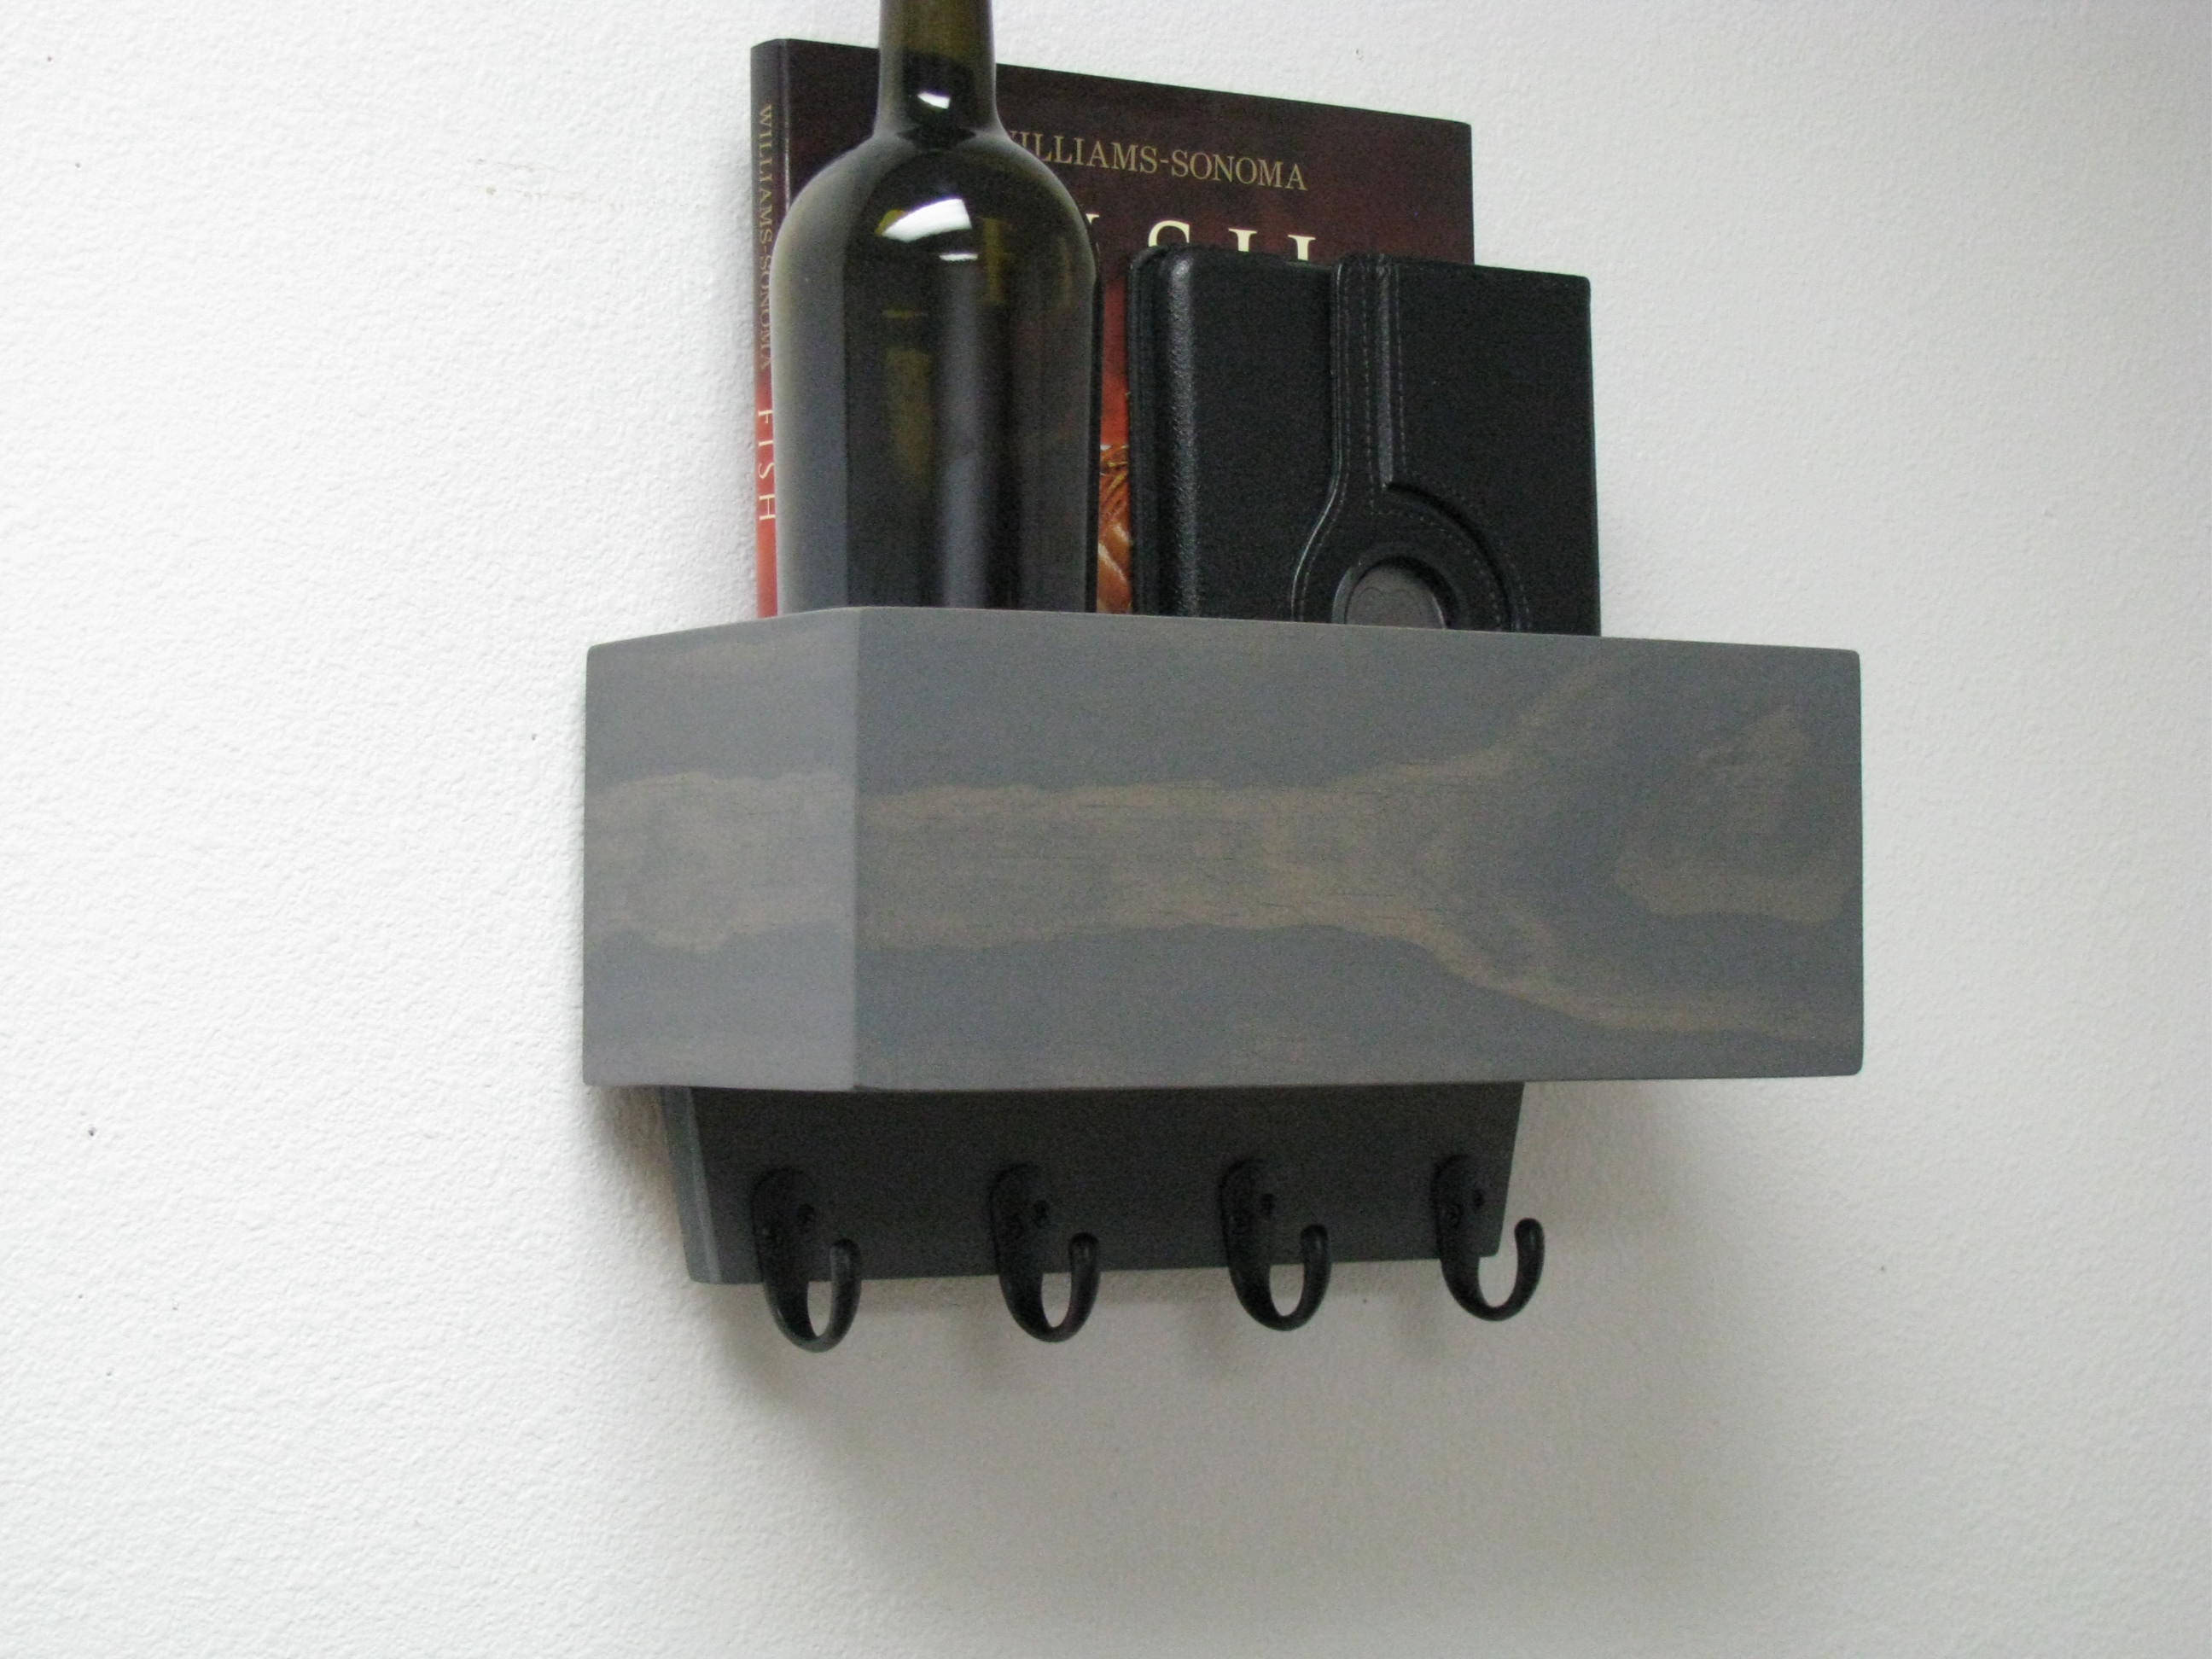 key holder for wall 12 inch